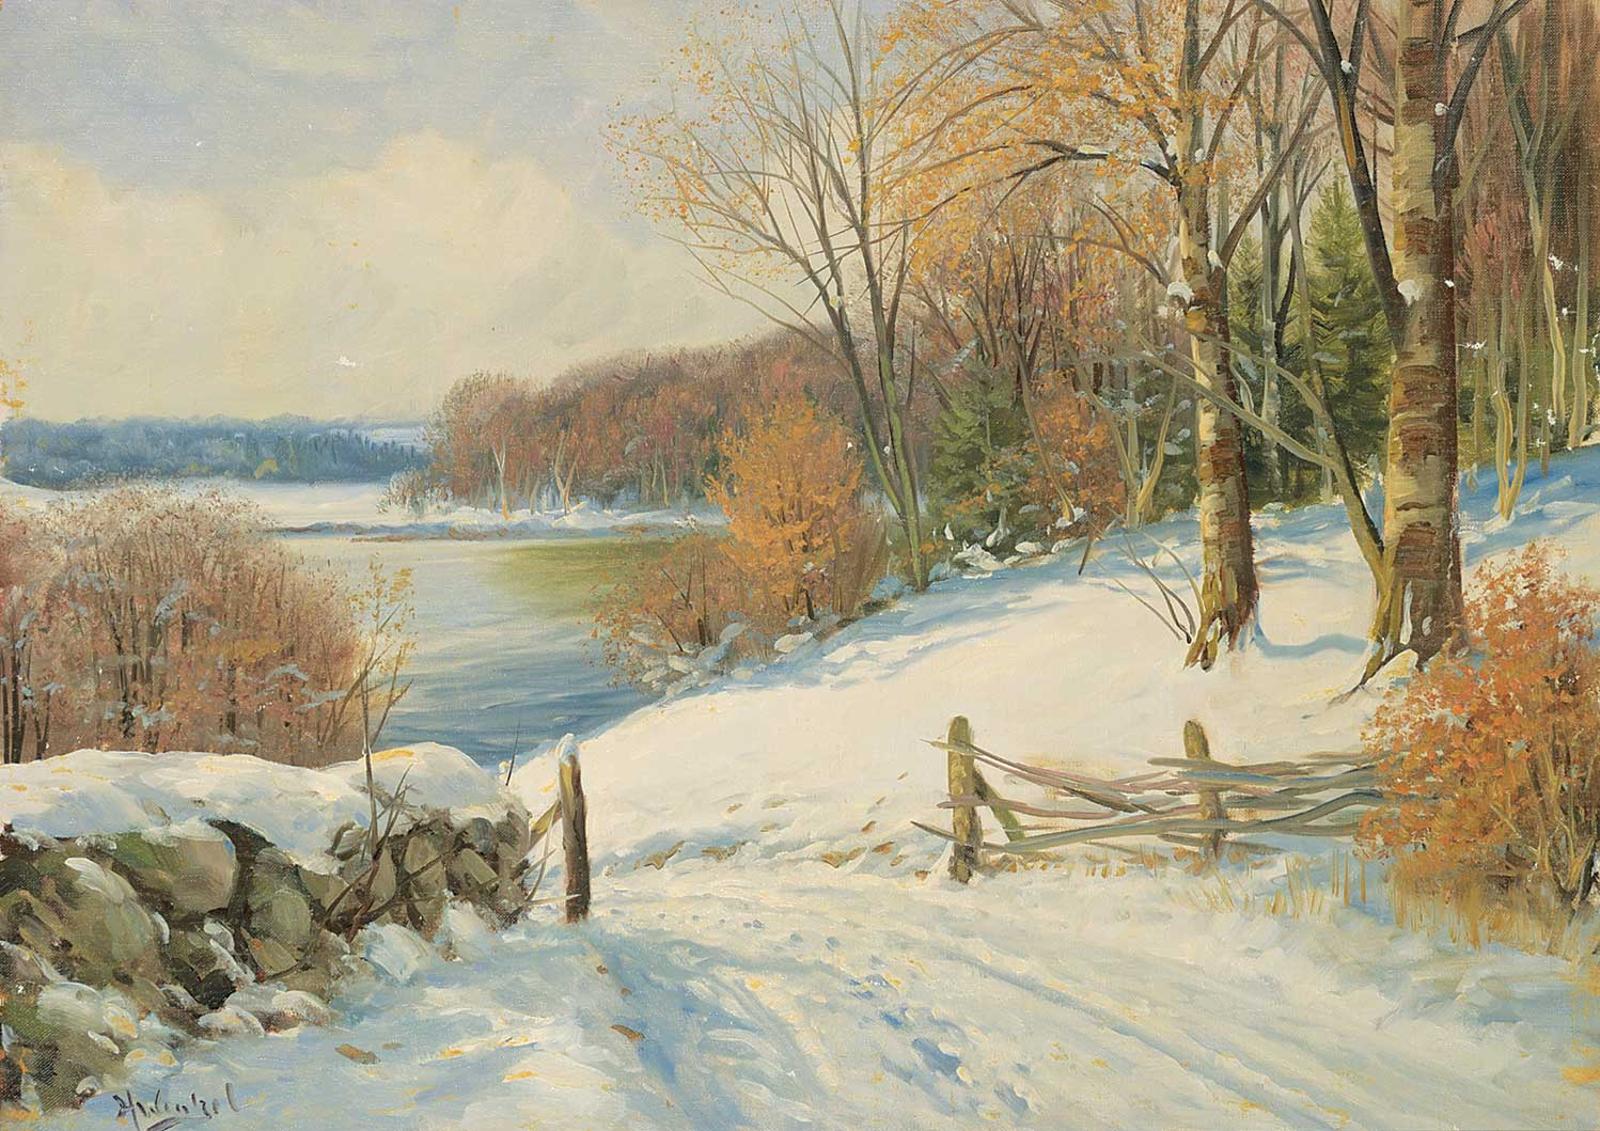 H. Wenzel - Untitled - Winter Road to the River